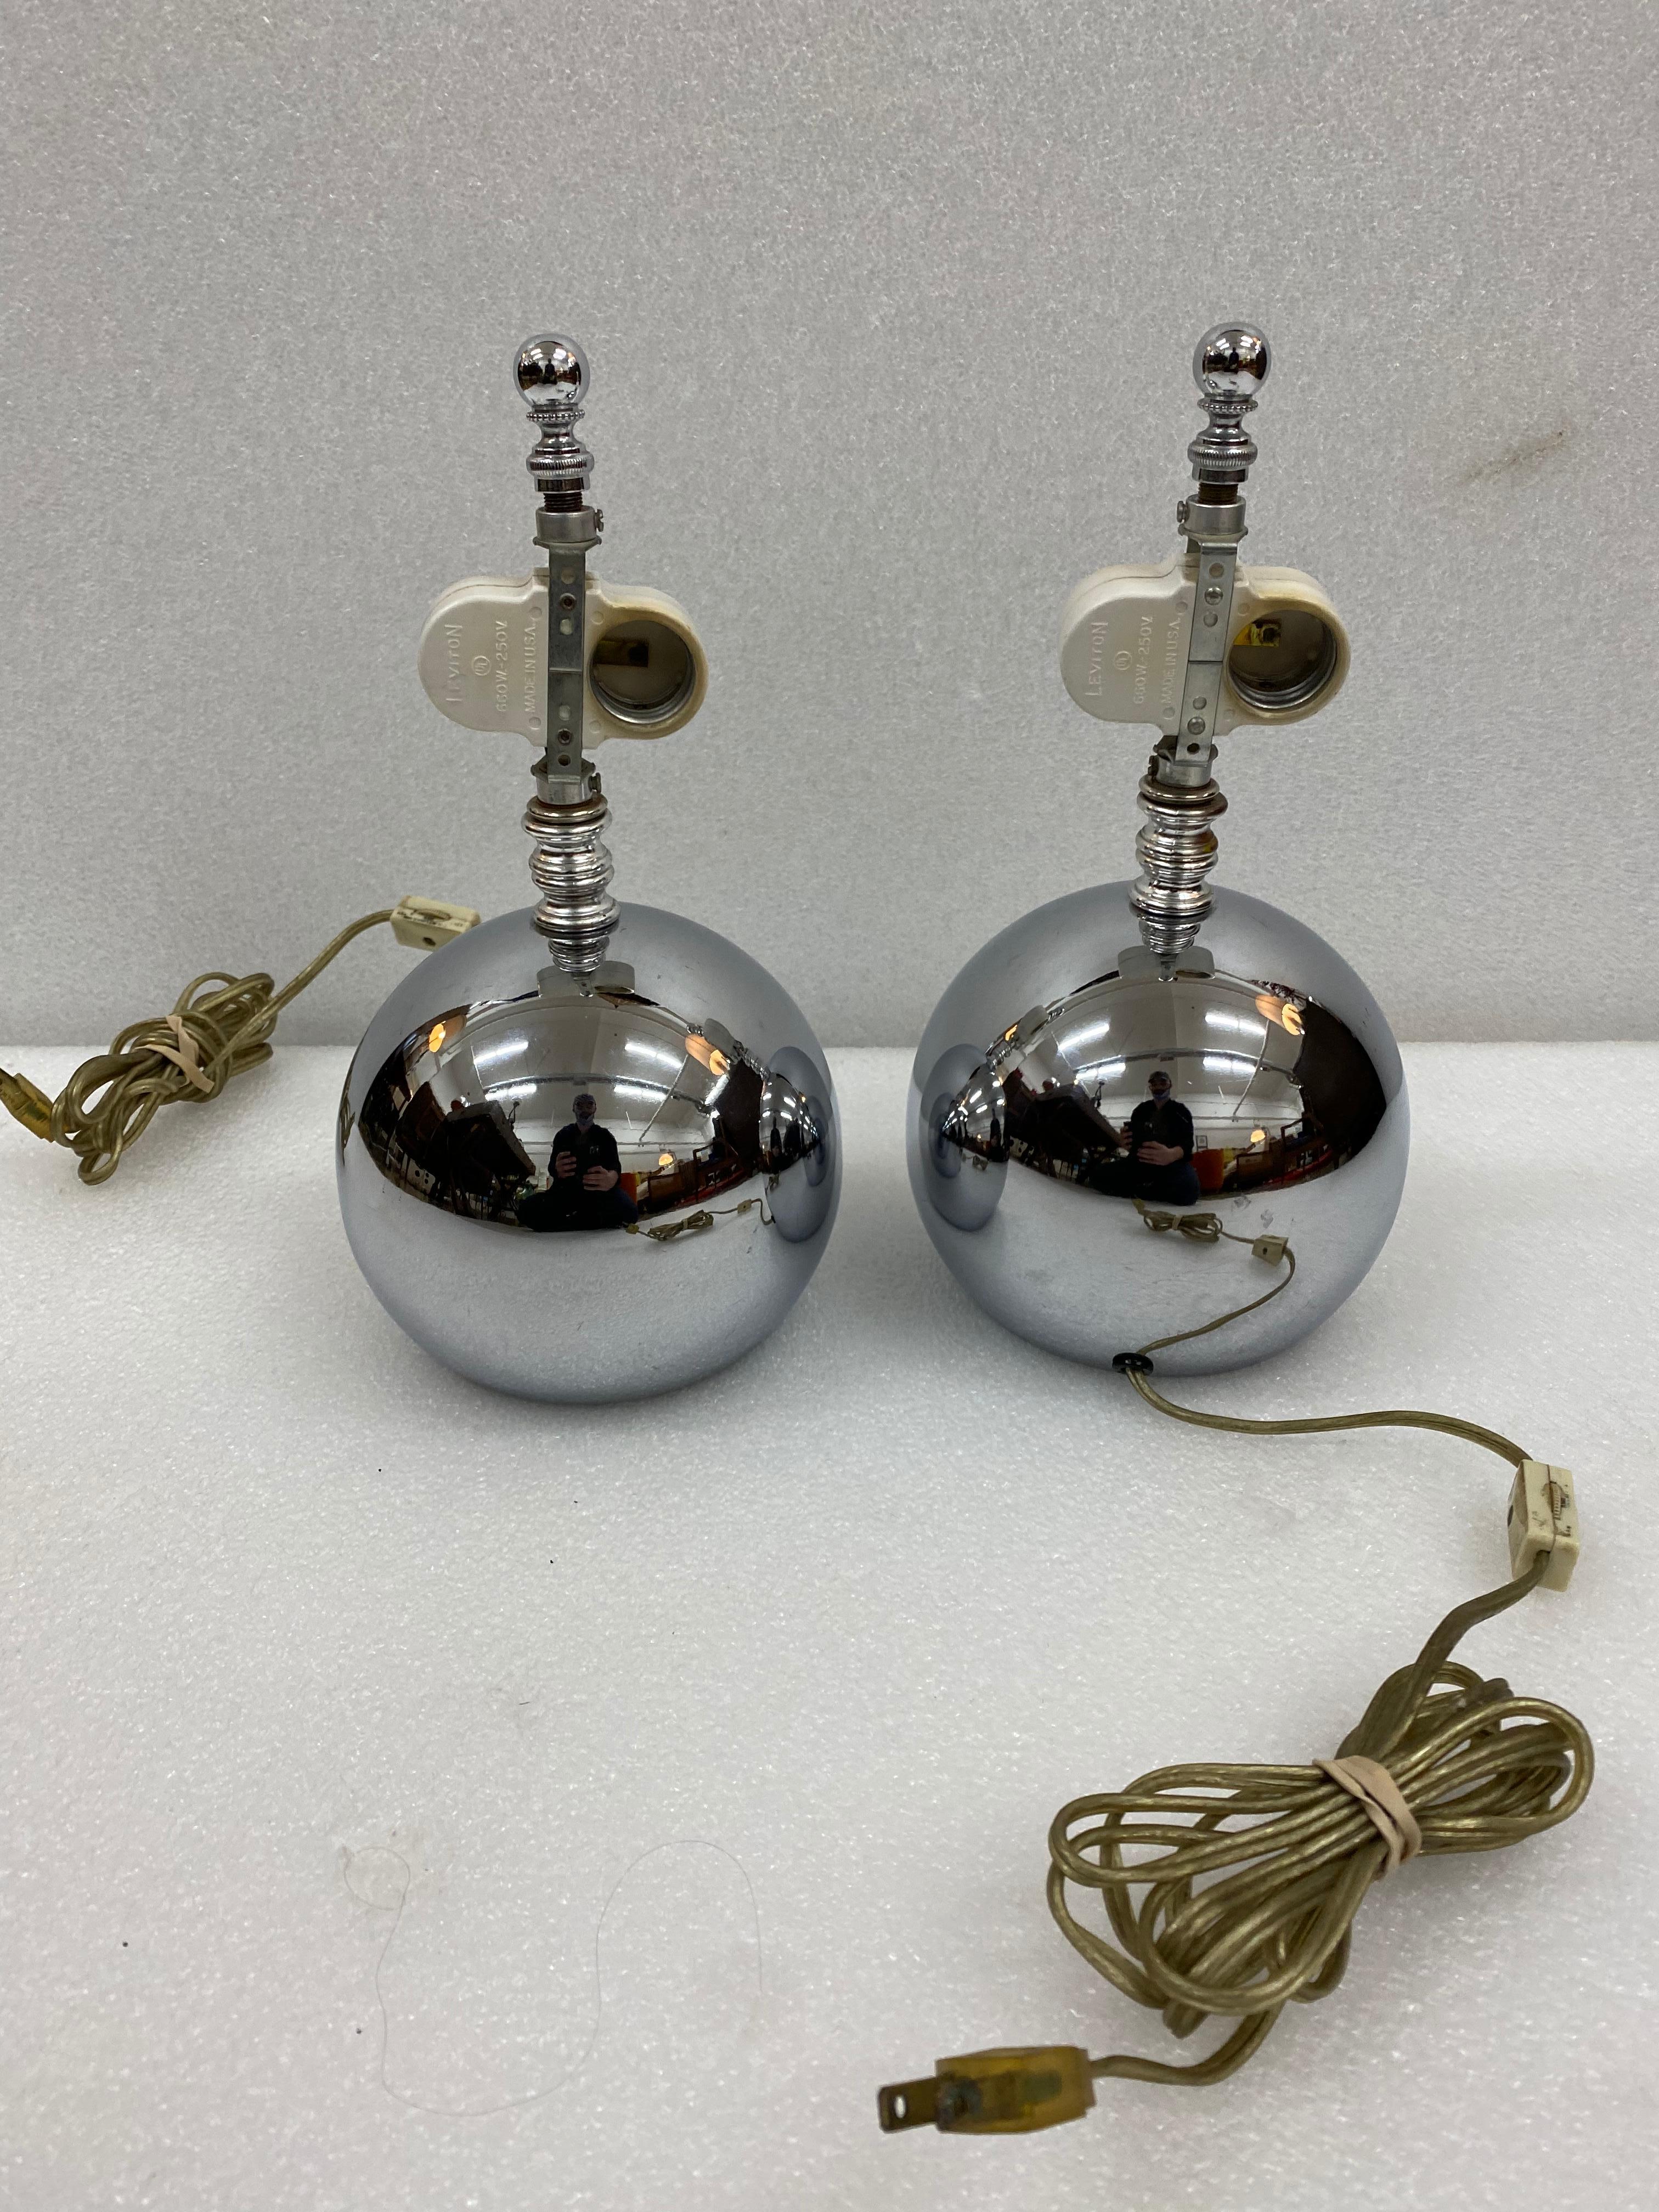 George Kovacs small single polished chrome ball lamp set. Perfect size for night tables, end tables, bookcases or desks. Pair of small George Kovacs polished chrome ball lamp. This hip style is Mid-Century Modern/Post Modern 1970s collectible. Lamps